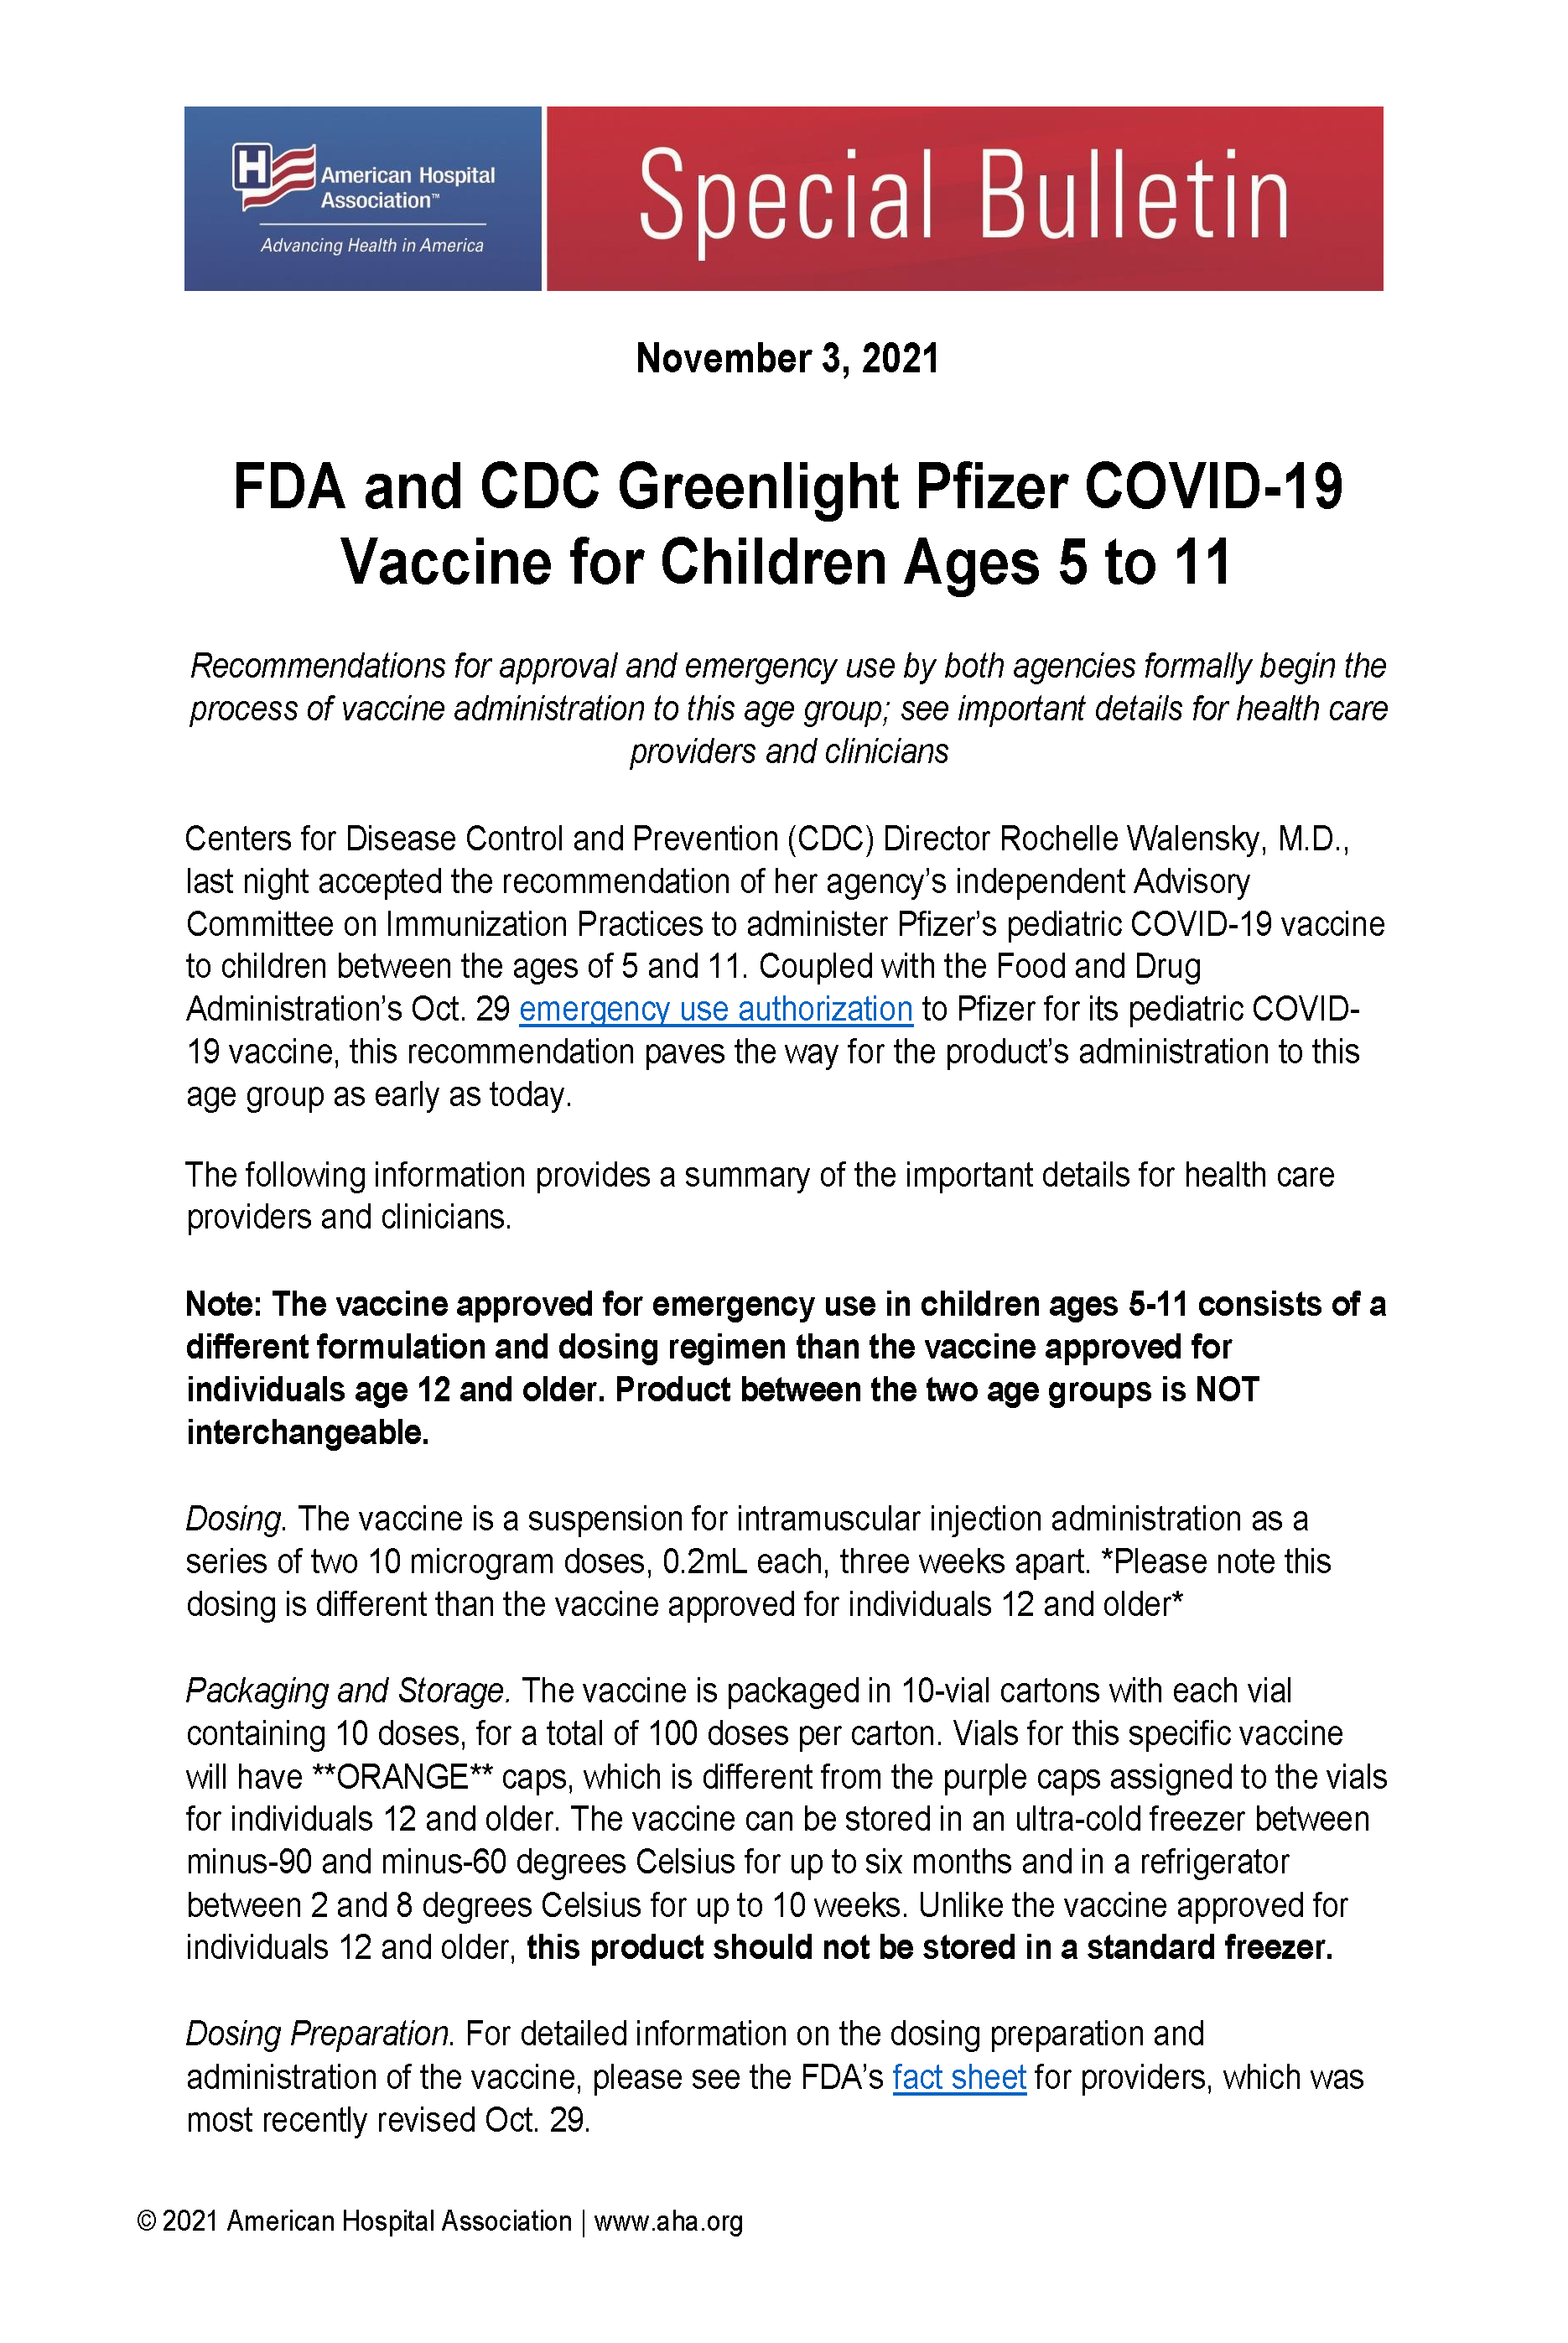 pecial Bulletin: FDA and CDC Greenlight Pfizer COVID-19 Vaccine for Children Ages 5 to 11. November 3, 2021. Page 1.